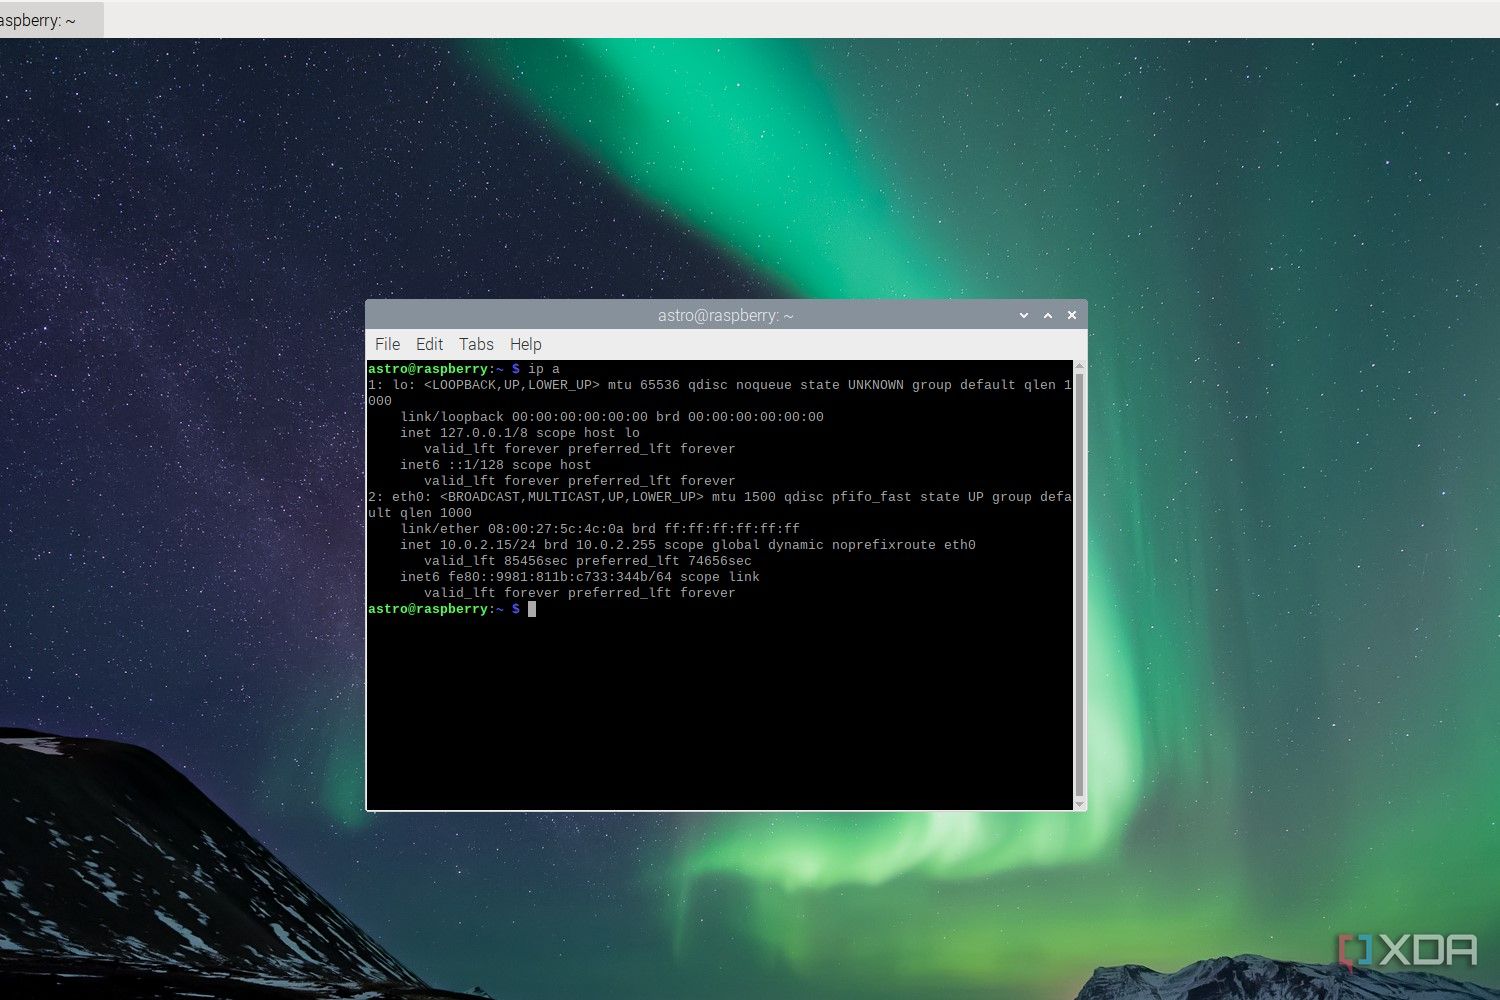 Raspberry Pi OS screenshot that shows the network interface information in the terminal.